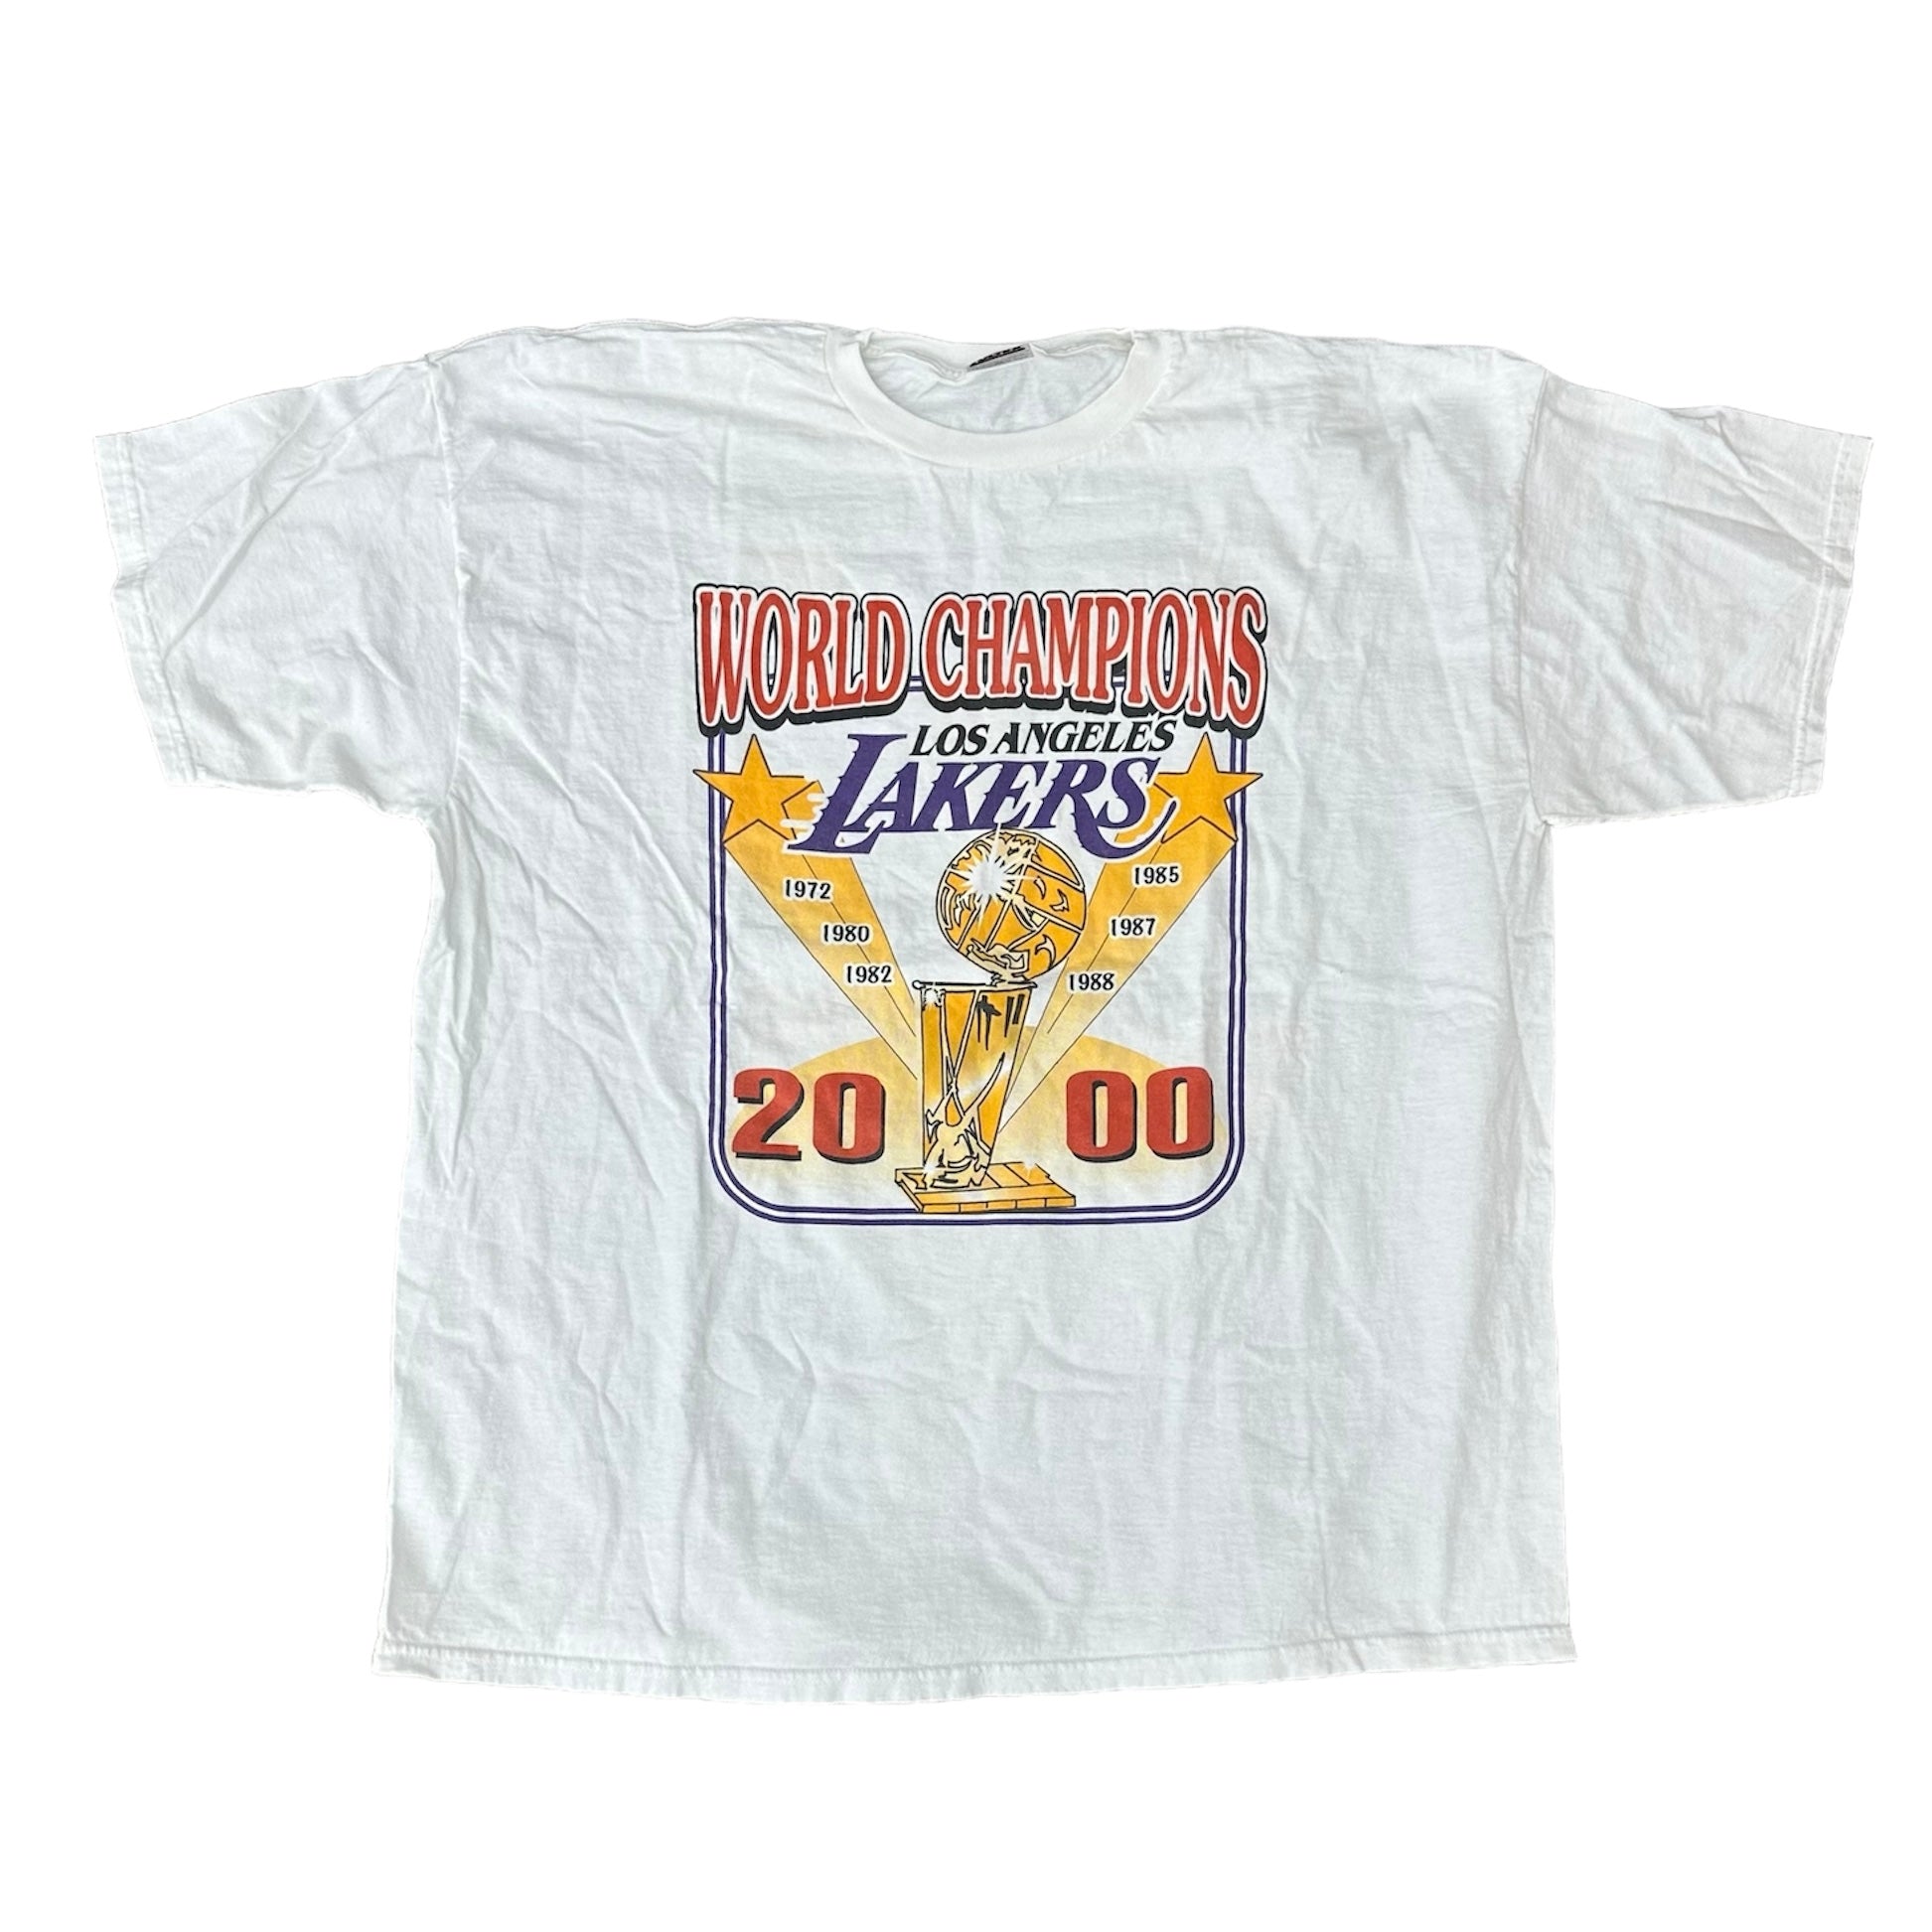 2000 LA LAKERS WORLD CHAMPS ROSTER TEE (LR)